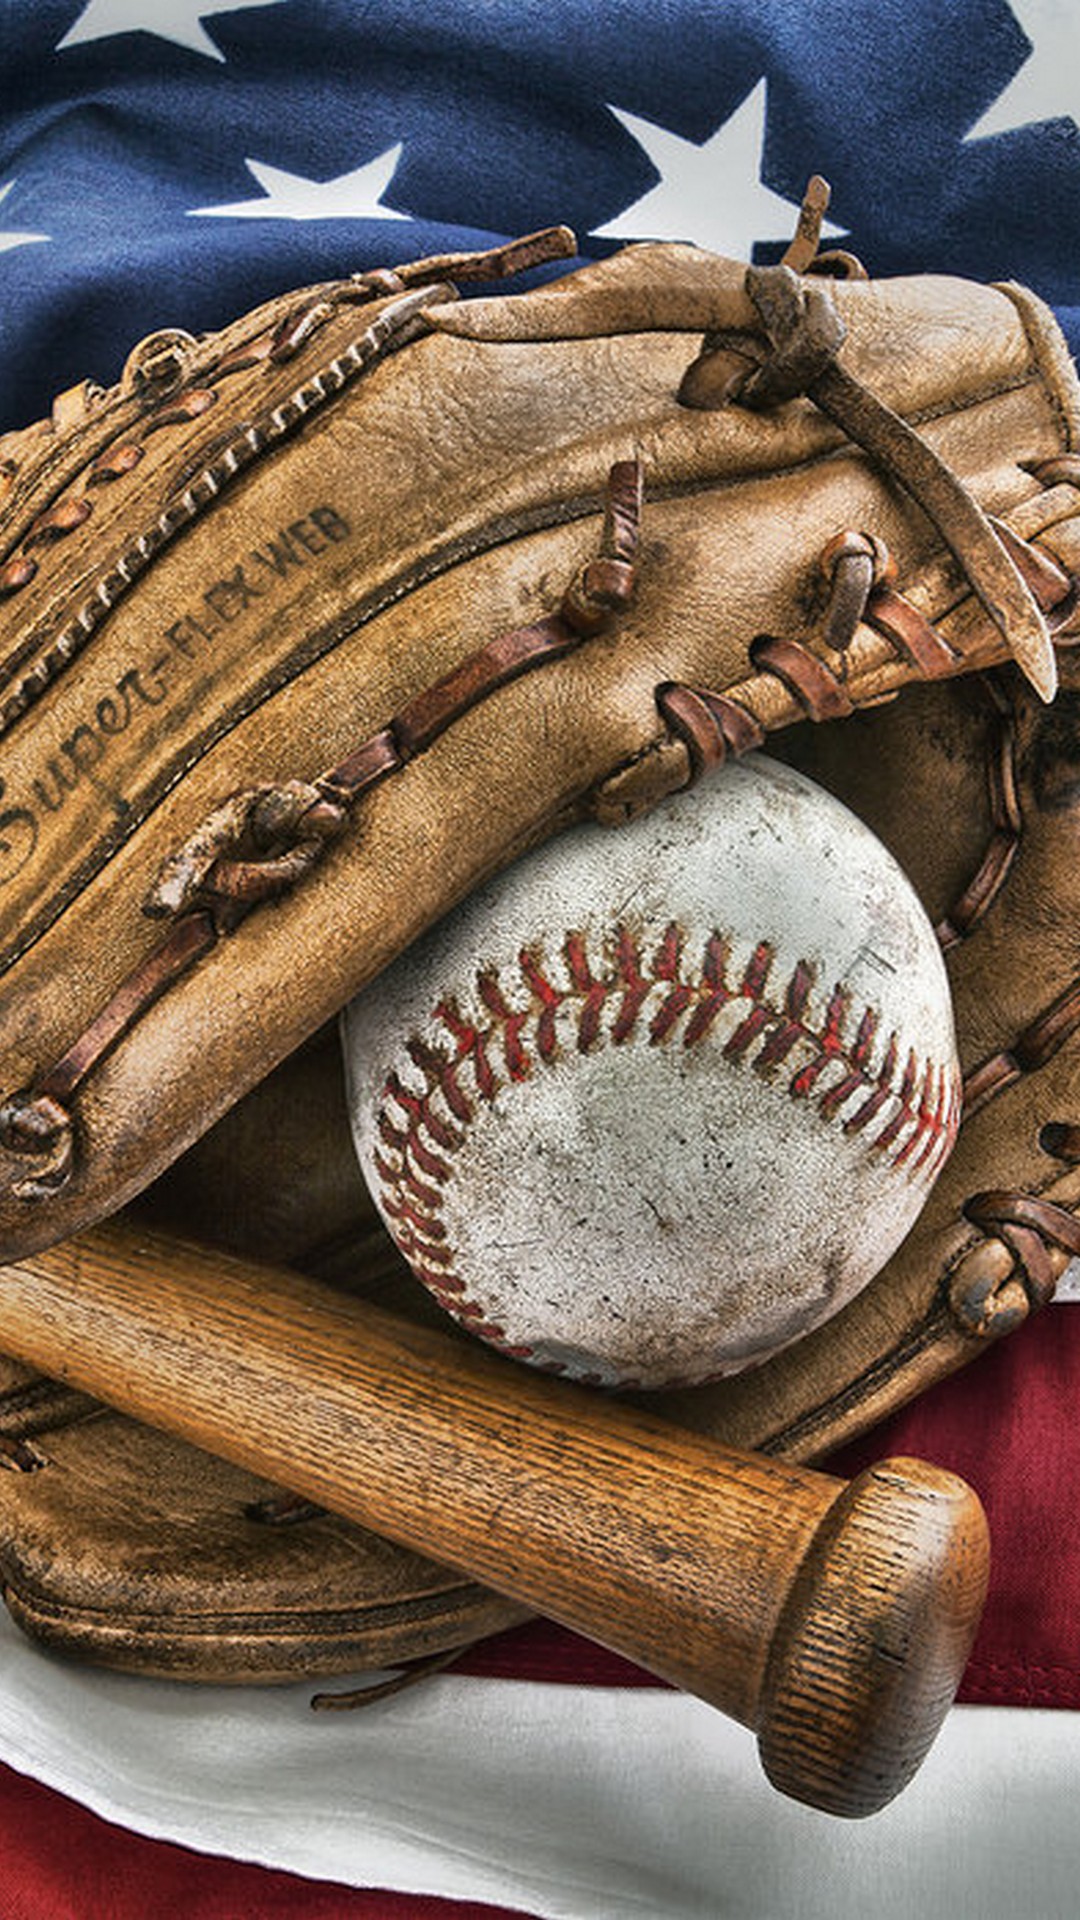 Baseball iPhone Wallpapers With high-resolution 1080X1920 pixel. You can use this wallpaper for Mac Desktop Wallpaper, Laptop Screensavers, Android Wallpapers, Tablet or iPhone Home Screen and another mobile phone device